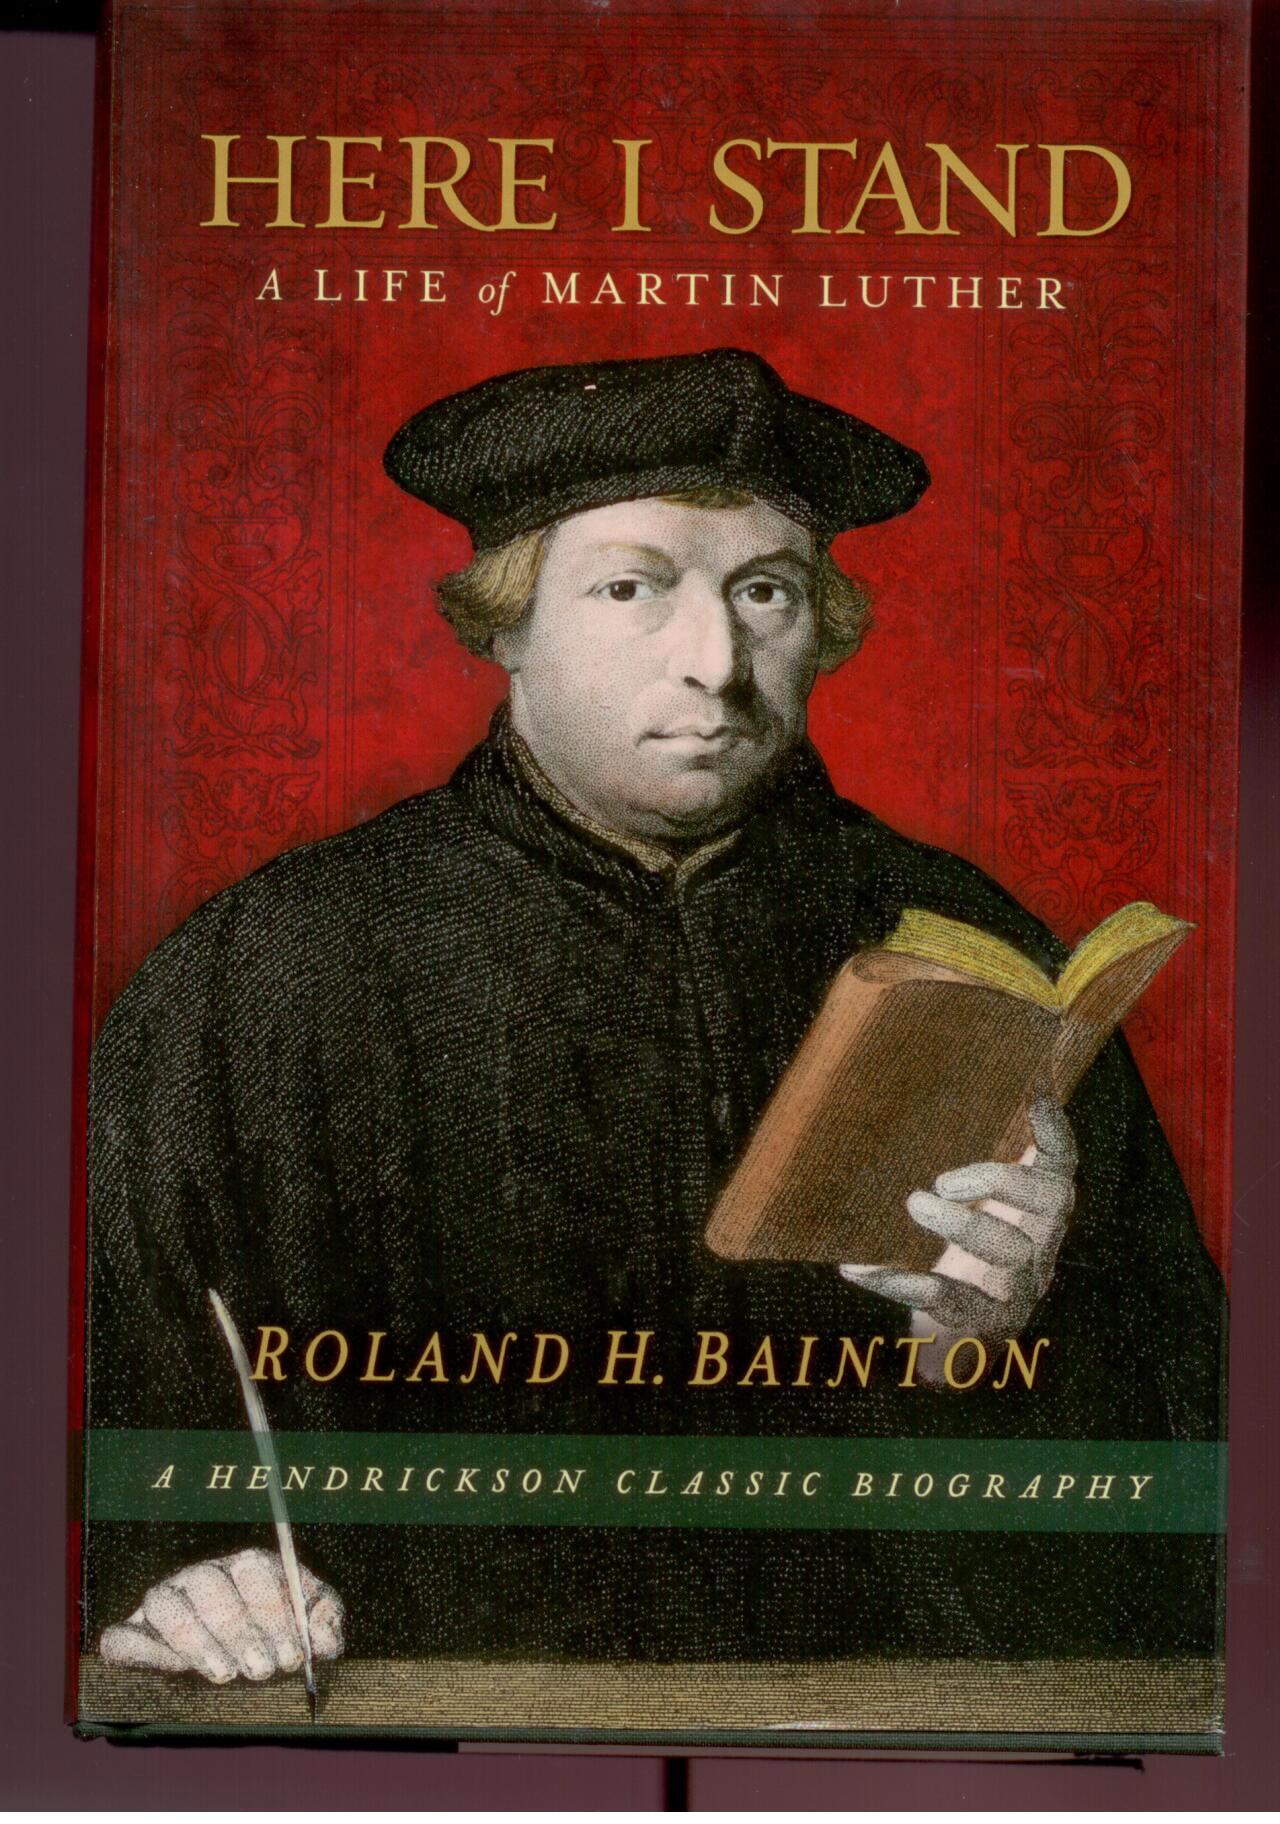 Here I Stand: Life of Martin Luther by Roland H. Bainton 108-9781598563337